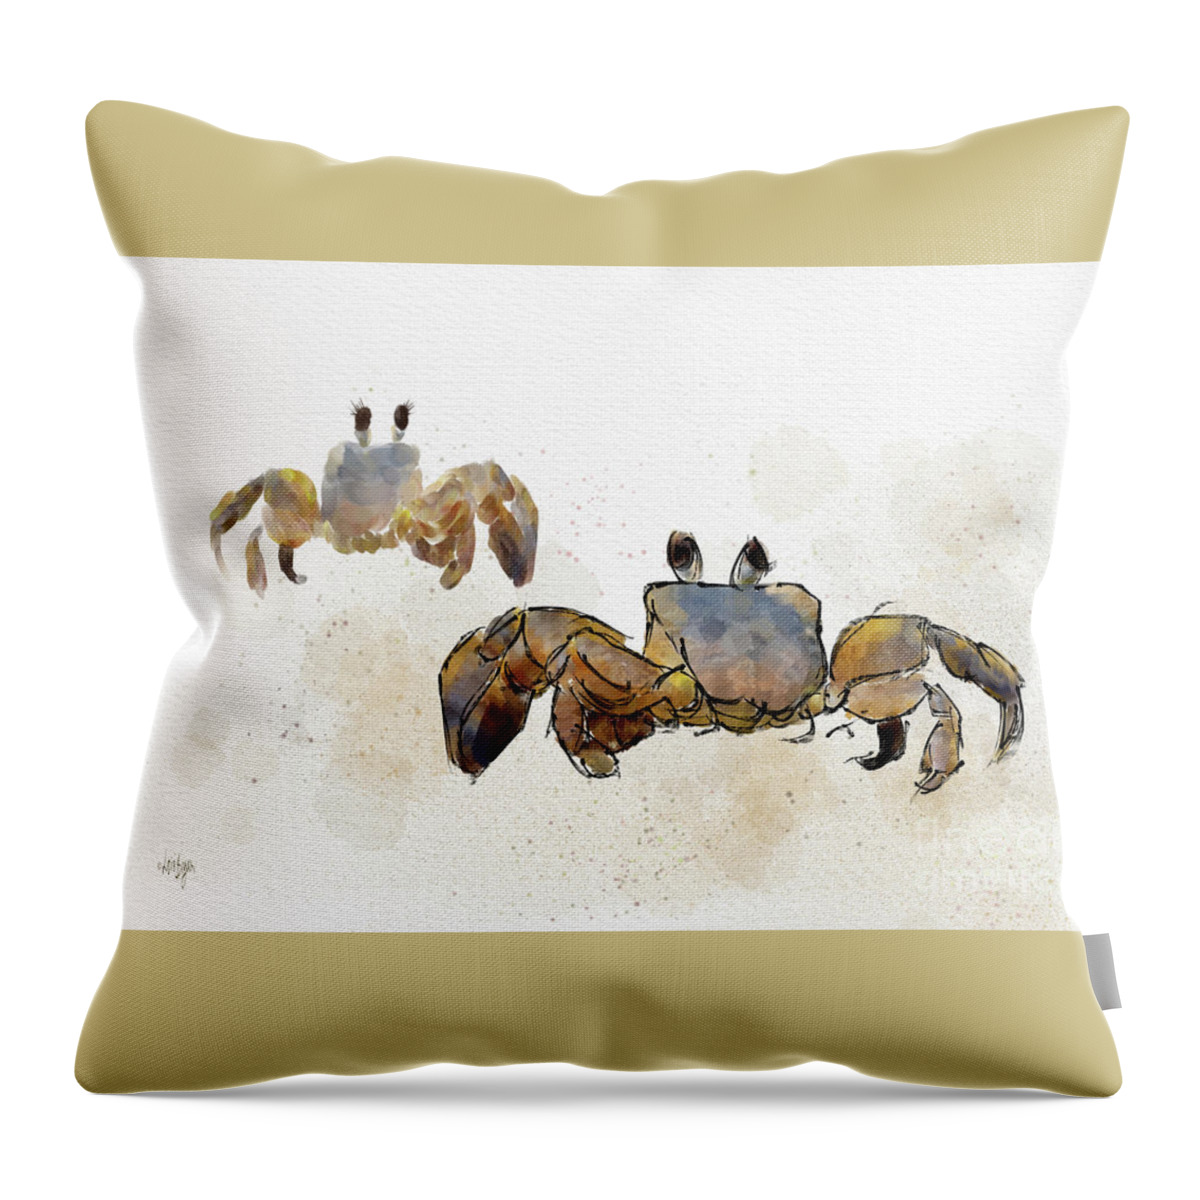 Animal Throw Pillow featuring the digital art Love At Last by Lois Bryan